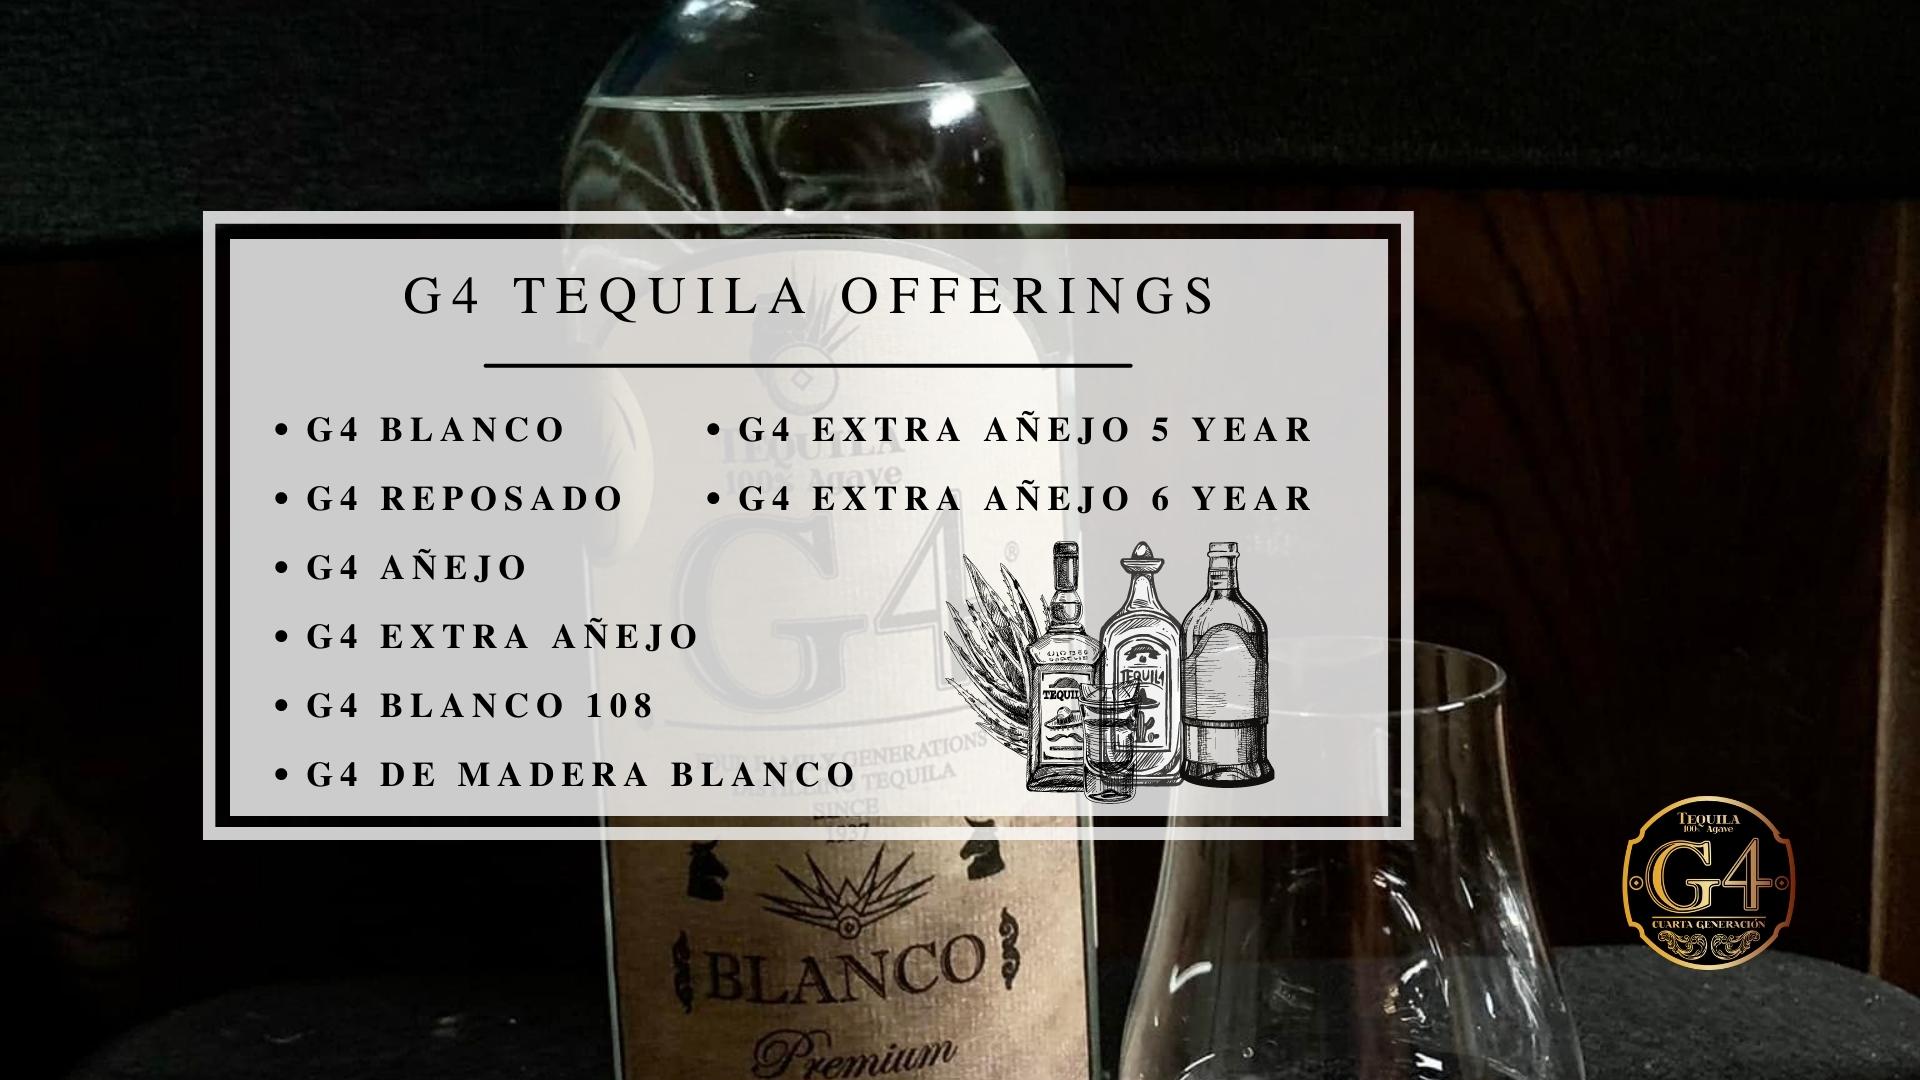 Infographic image of g4 tequila offerings